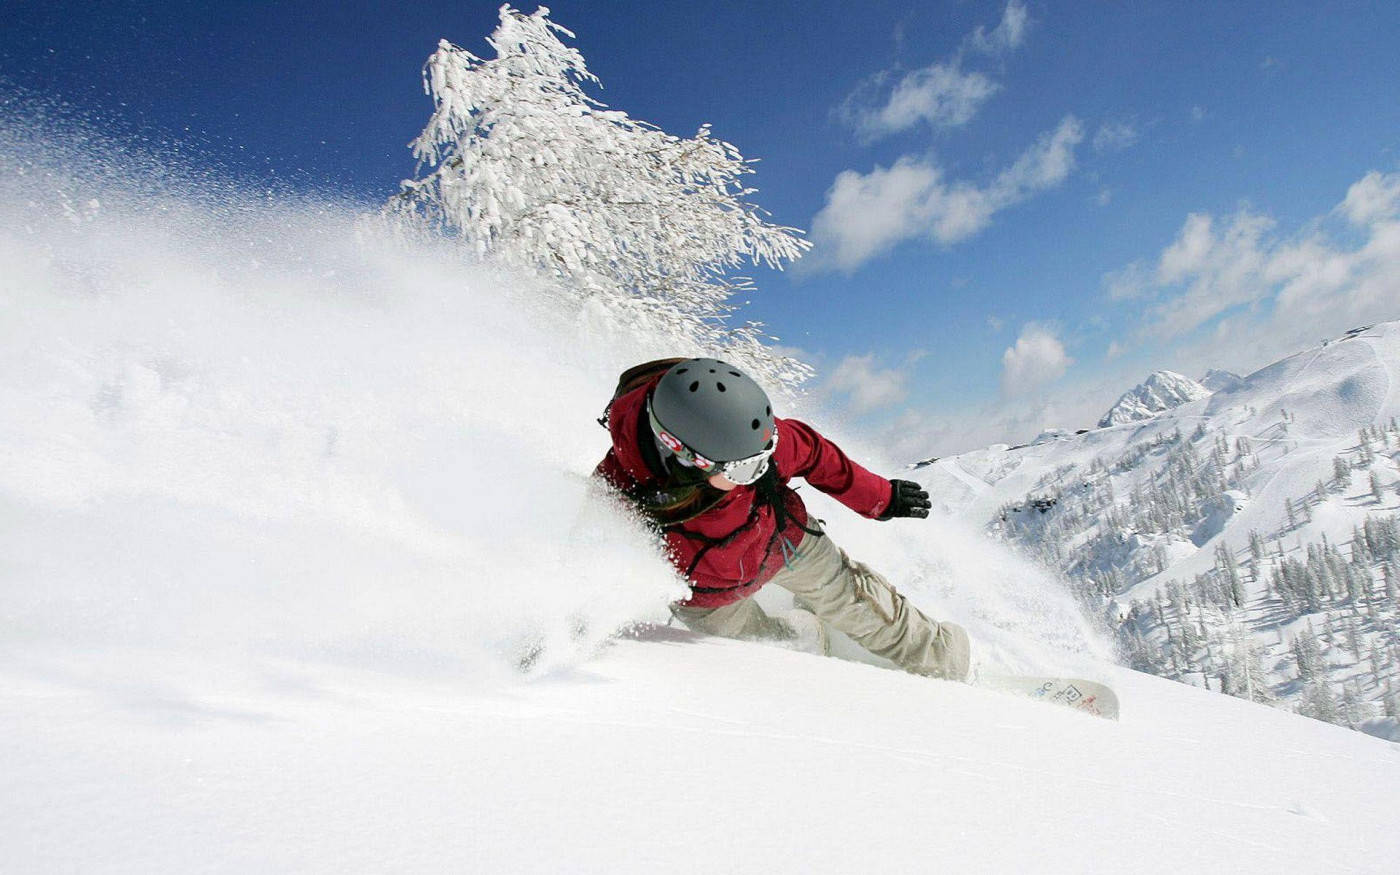 Man In Red With Snowboard Dashing Through Snow Wallpaper